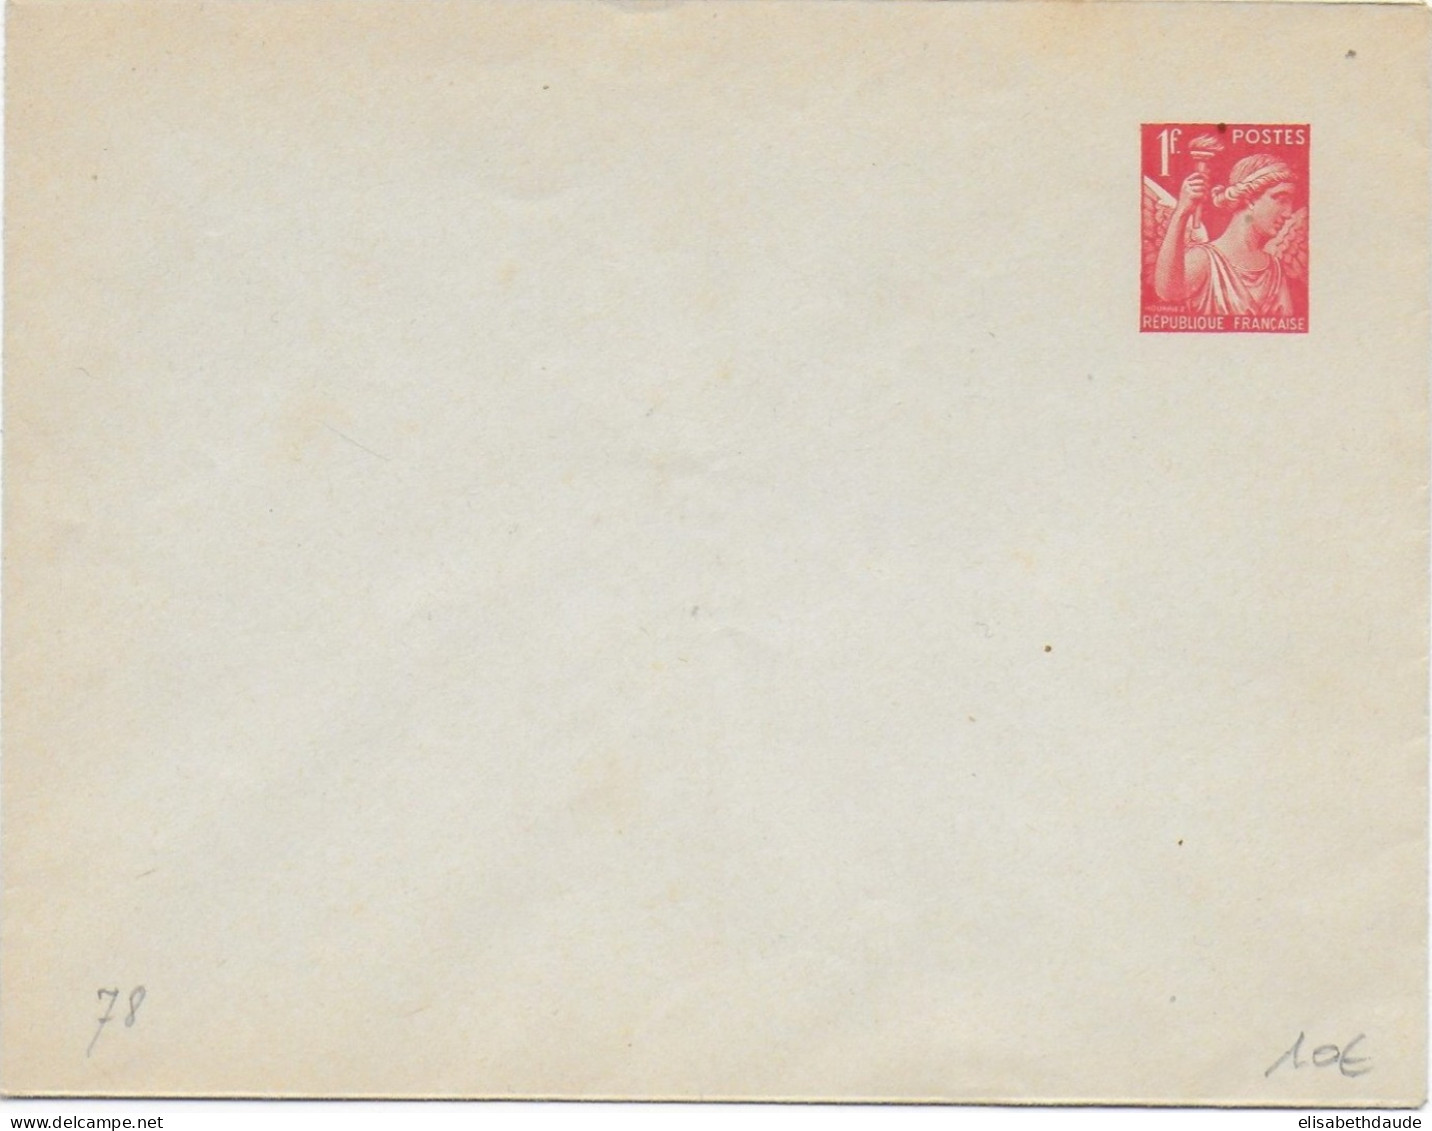 IRIS - 1940 - ENVELOPPE ENTIER POSTAL NEUVE STORCH B2 - COTE = 30 EUR. - Standard Covers & Stamped On Demand (before 1995)